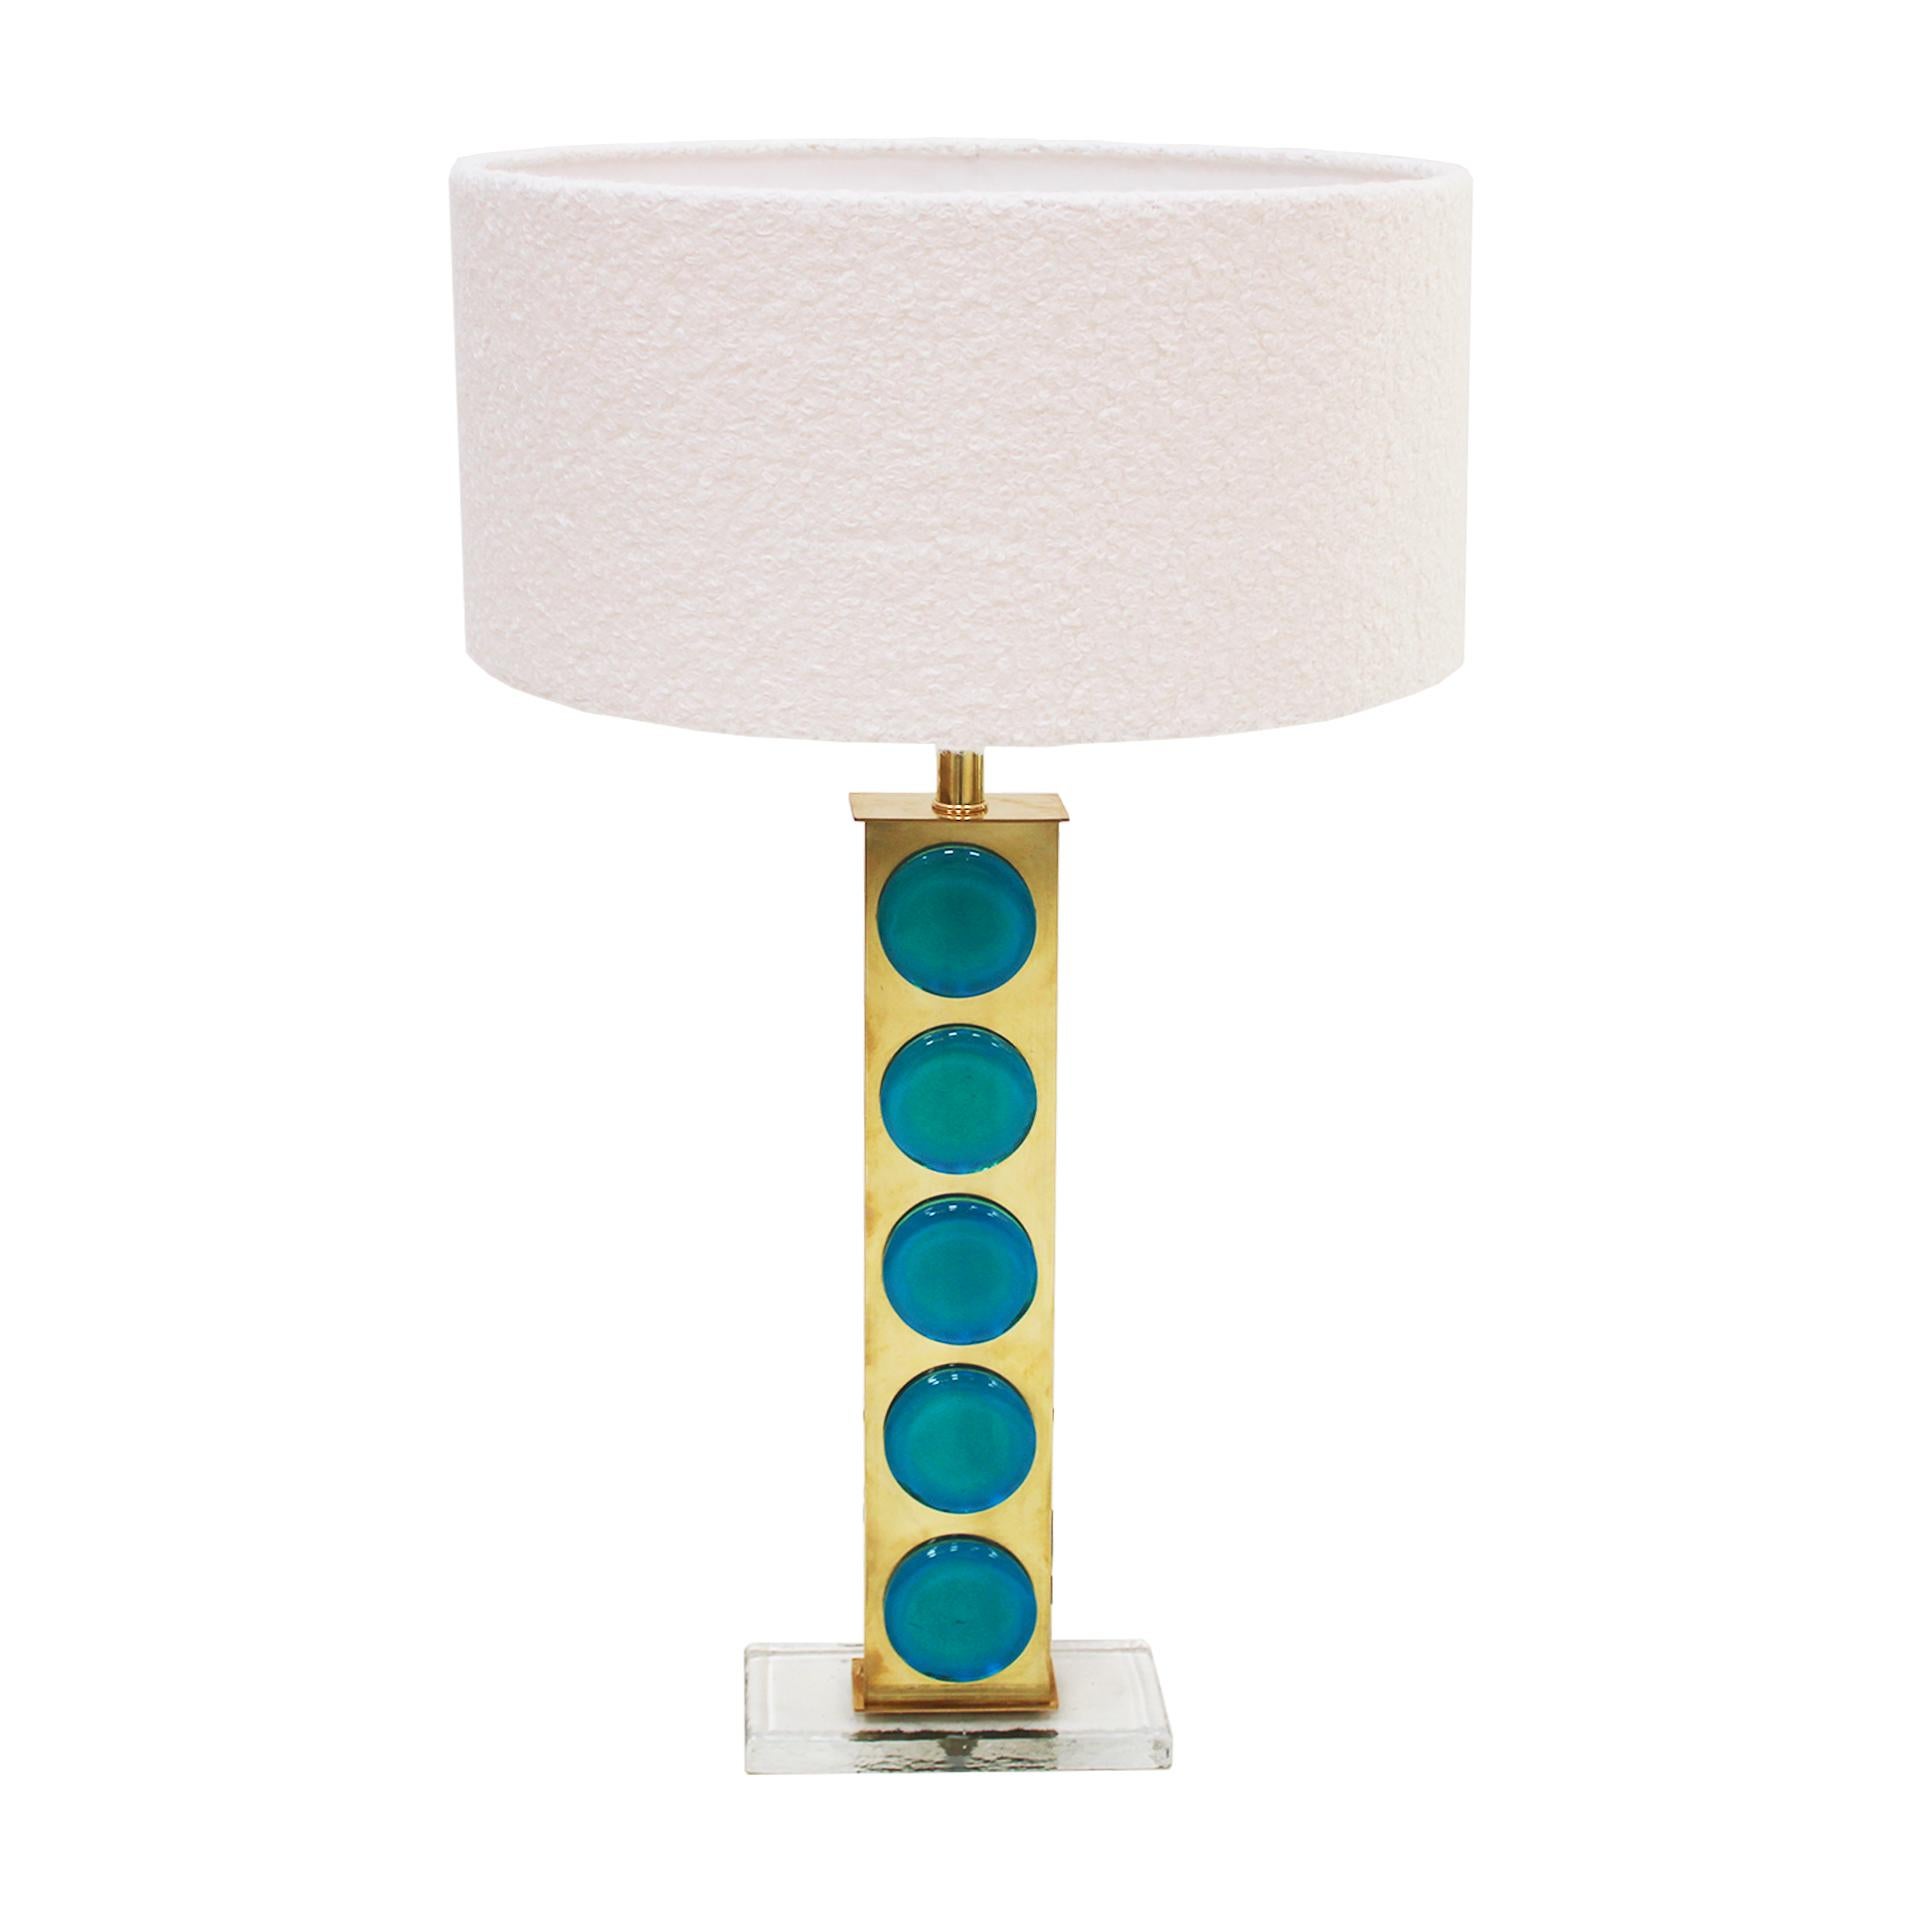 Midcentury style pair of Italian table lamps with brass structure and light blue murano glass pieces. Circular screens in white bouclé.